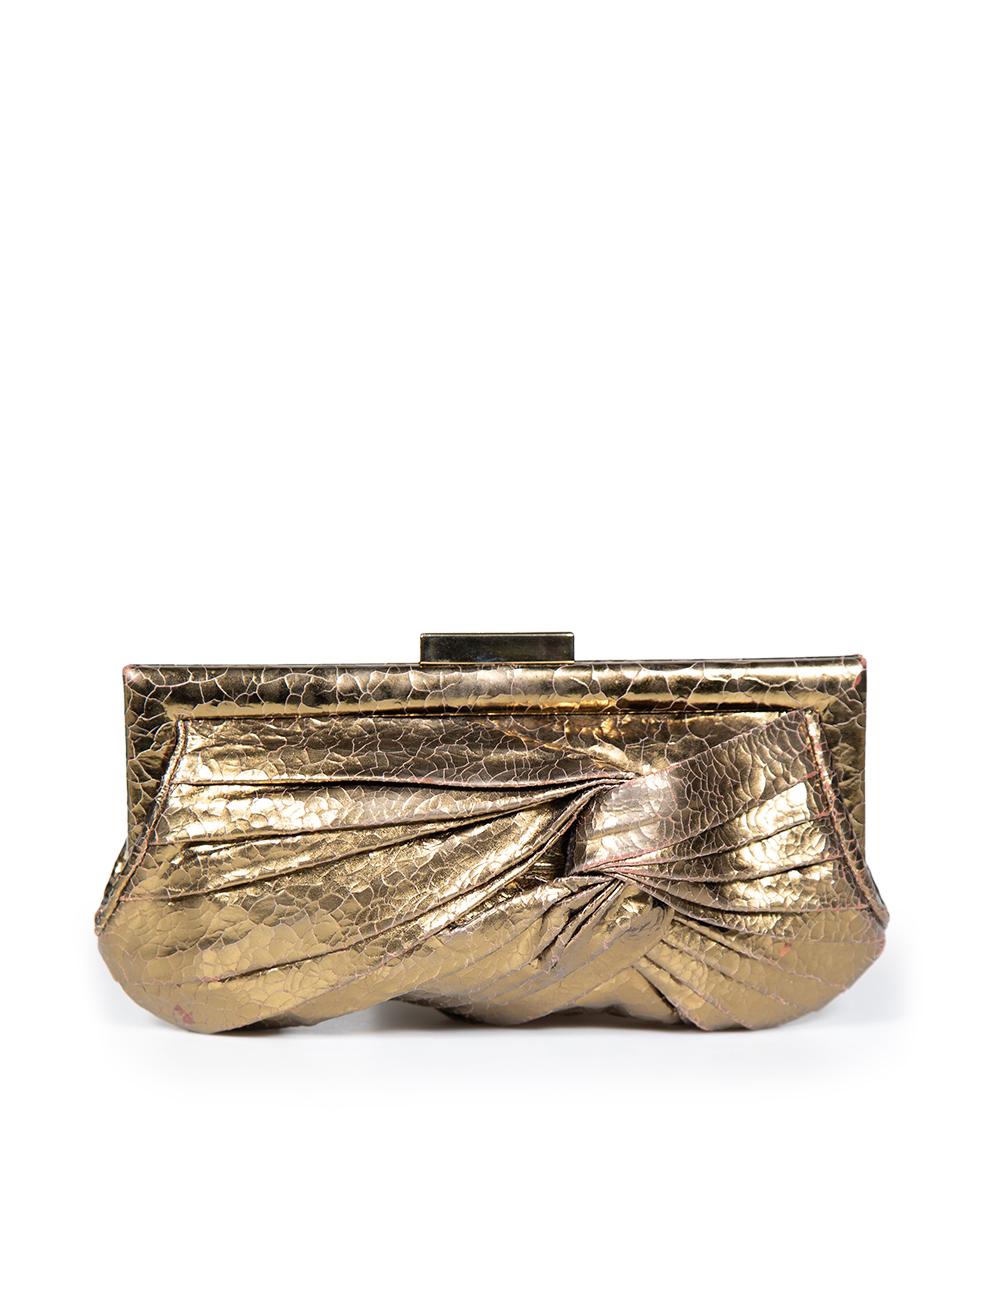 Anya Hindmarch Gold Cracked Leather Knot Clutch In Good Condition For Sale In London, GB